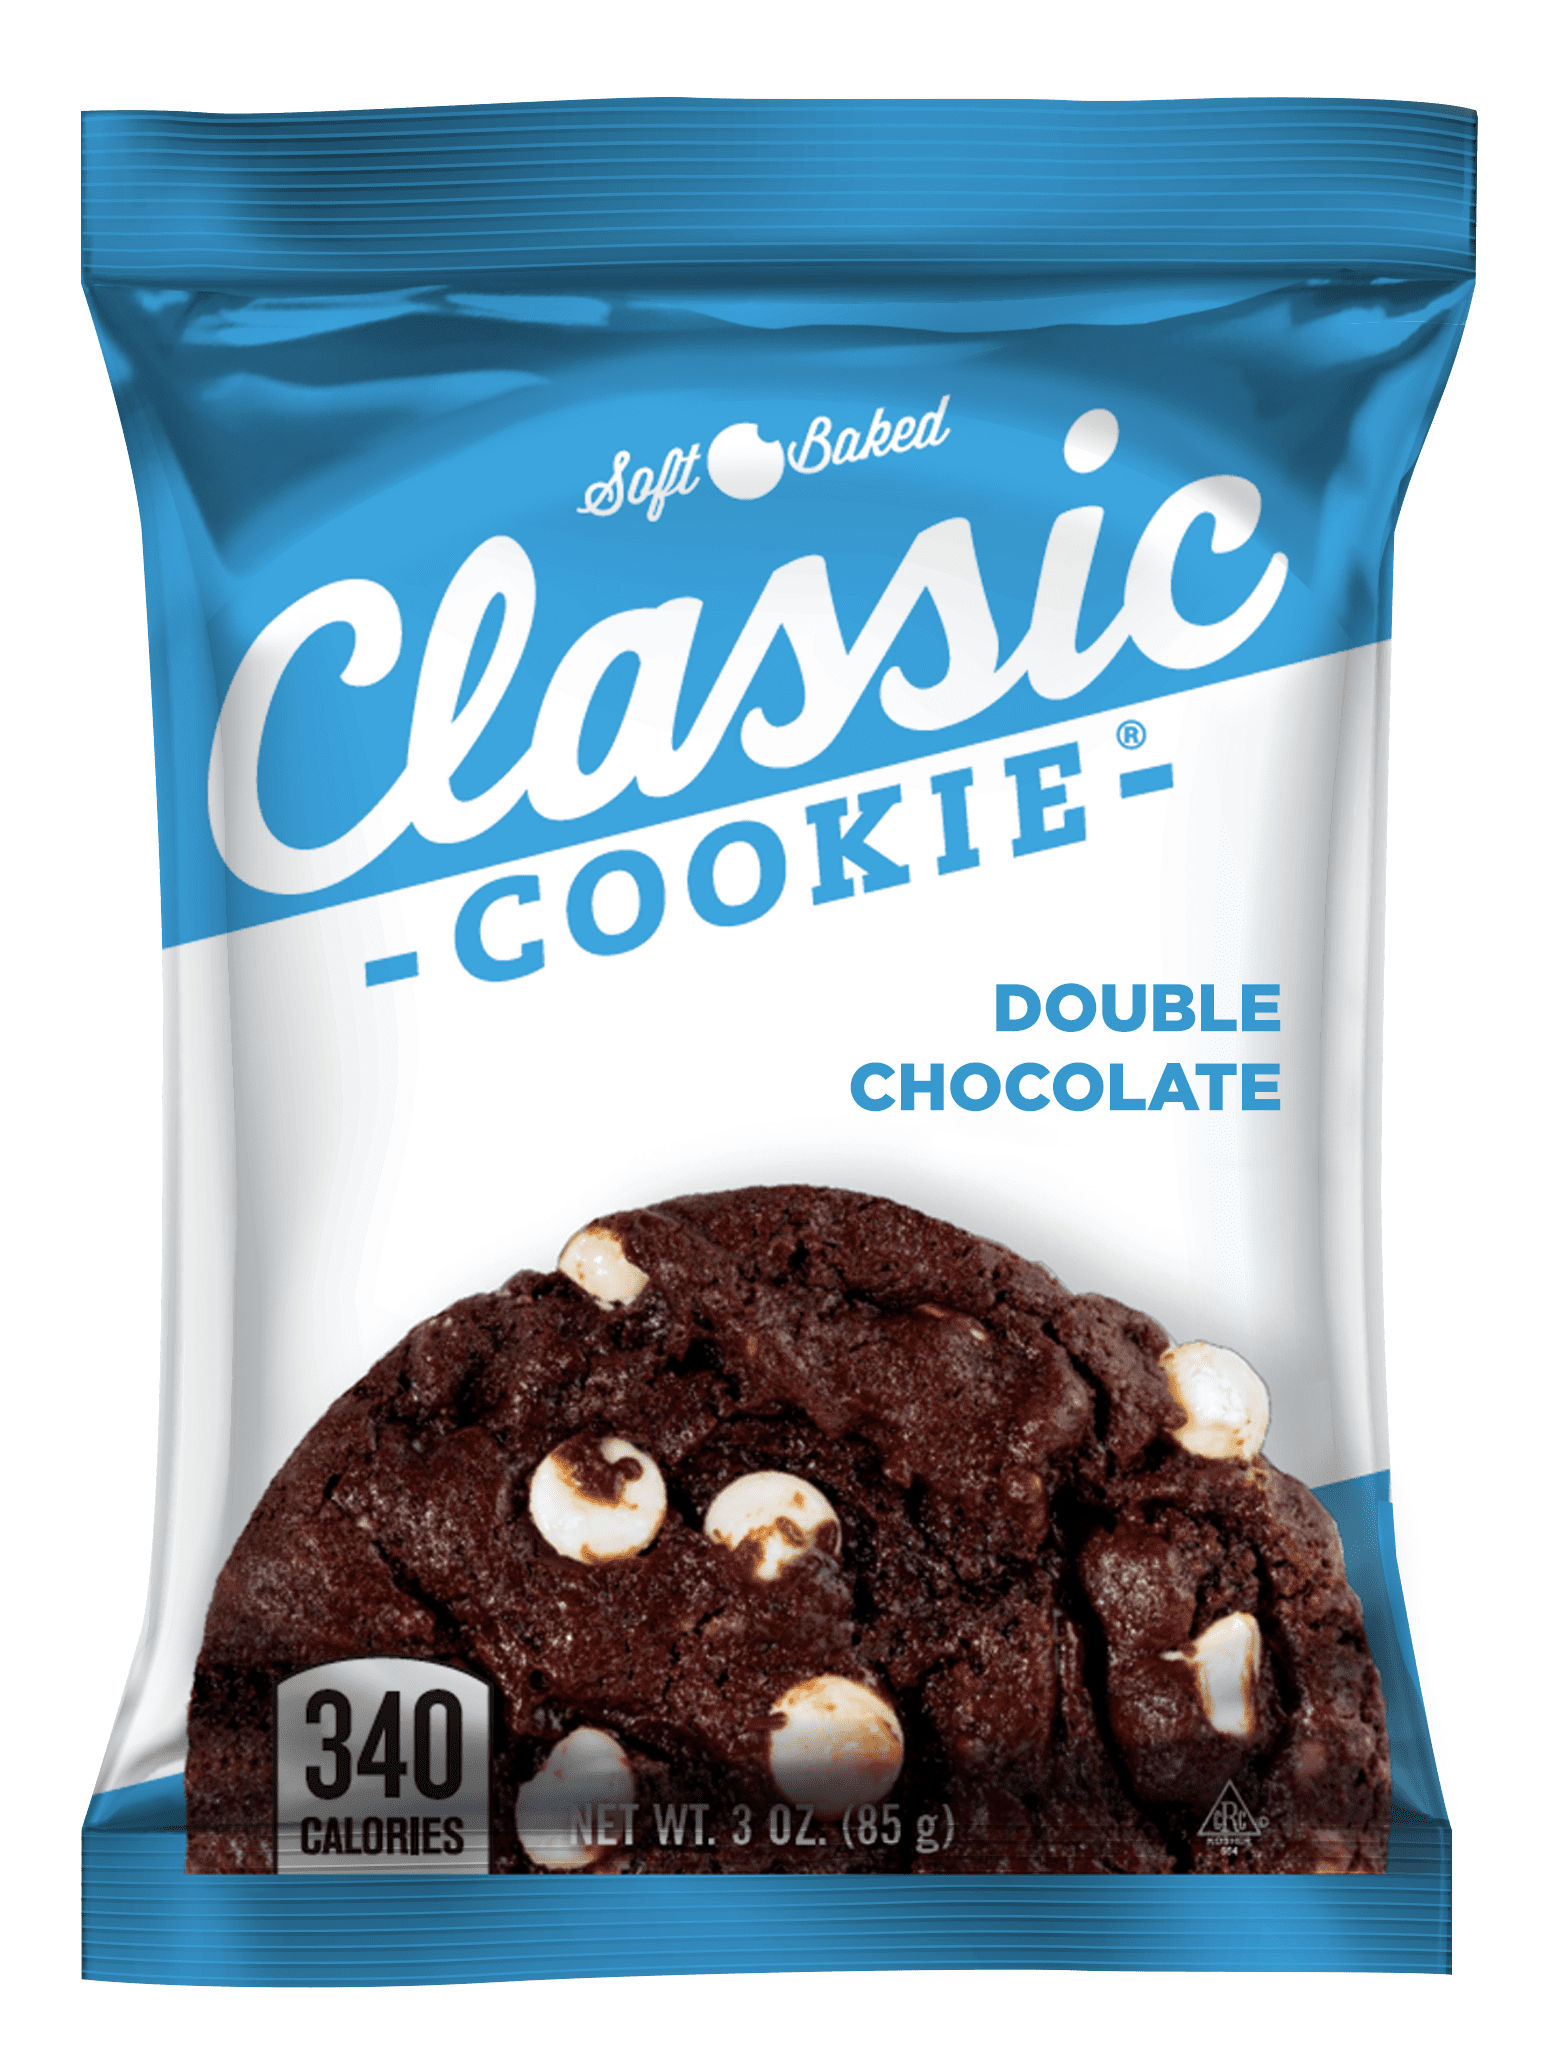 Classic Cookie Soft Baked Double Chocolate Cookies made with Hershey's�  Chocolate, 2 Boxes, 16 Individually Wrapped Cookies 